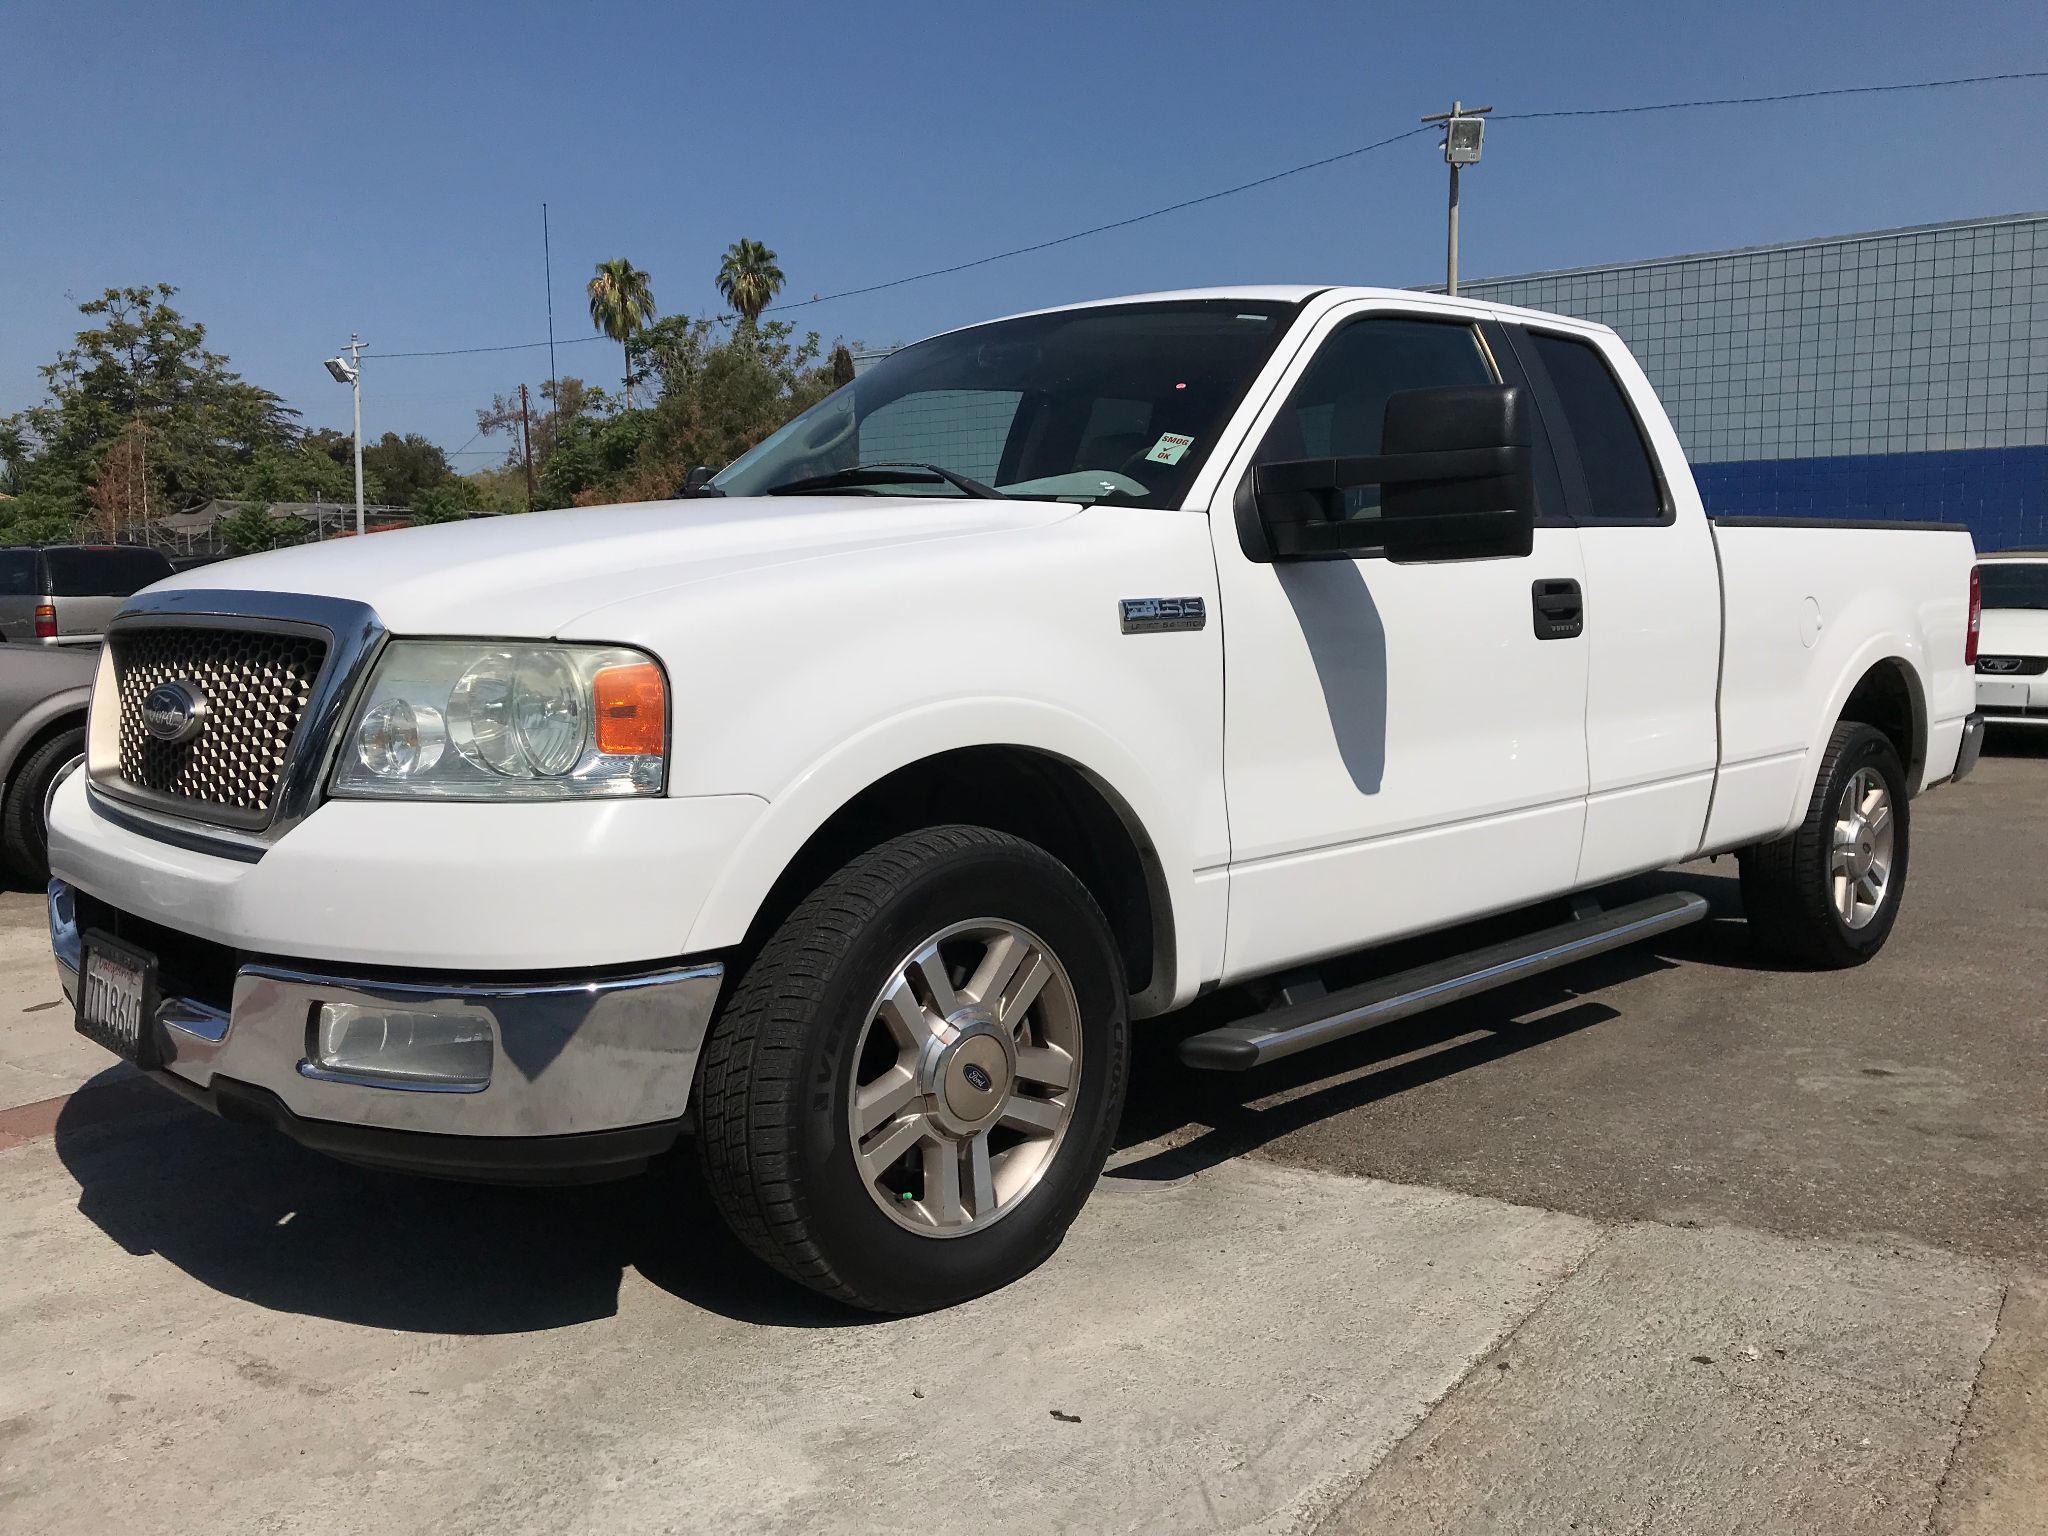 Used 2005 Ford F-150 Lariat at City Cars Warehouse INC